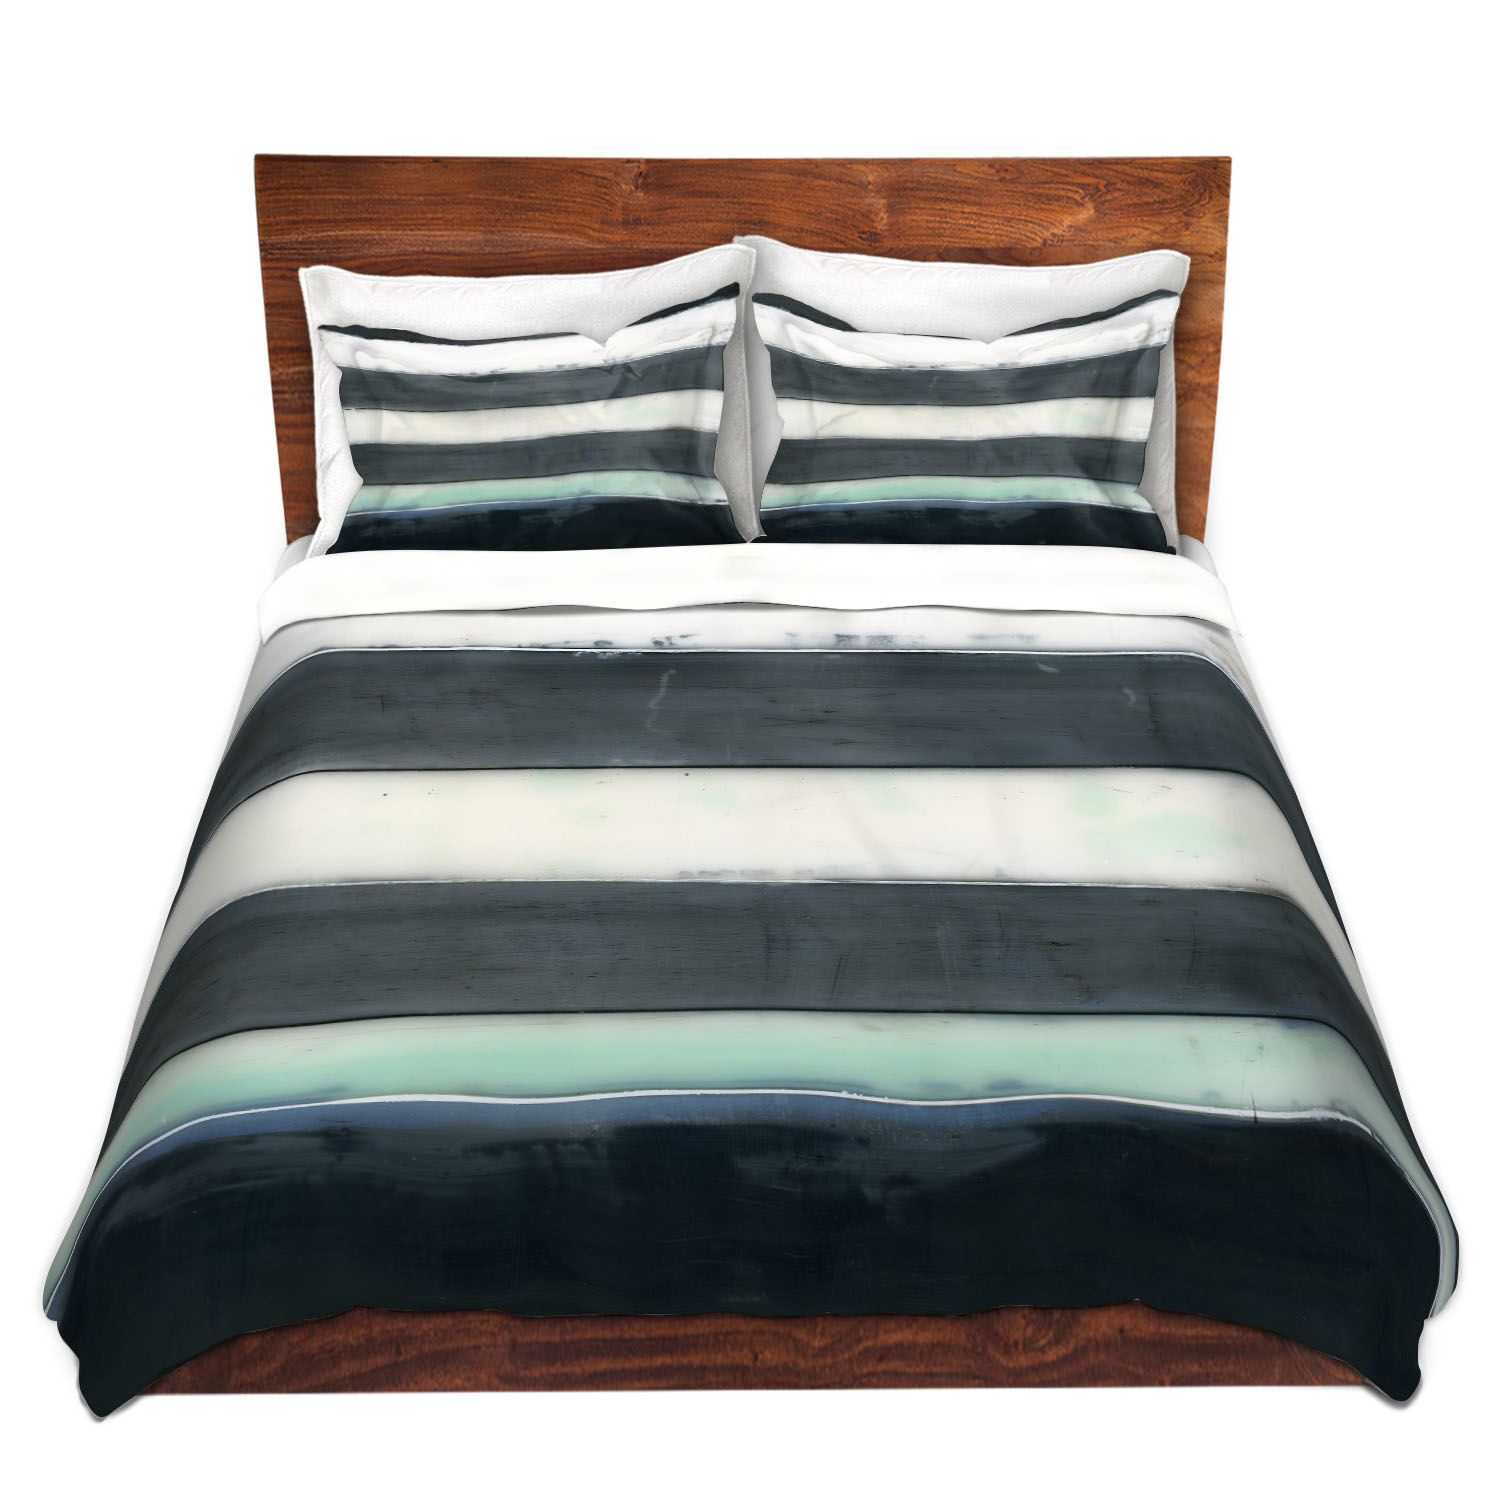 Dianoche Microfiber Duvet Covers By Dora Ficher - Not Always Black Or White 1